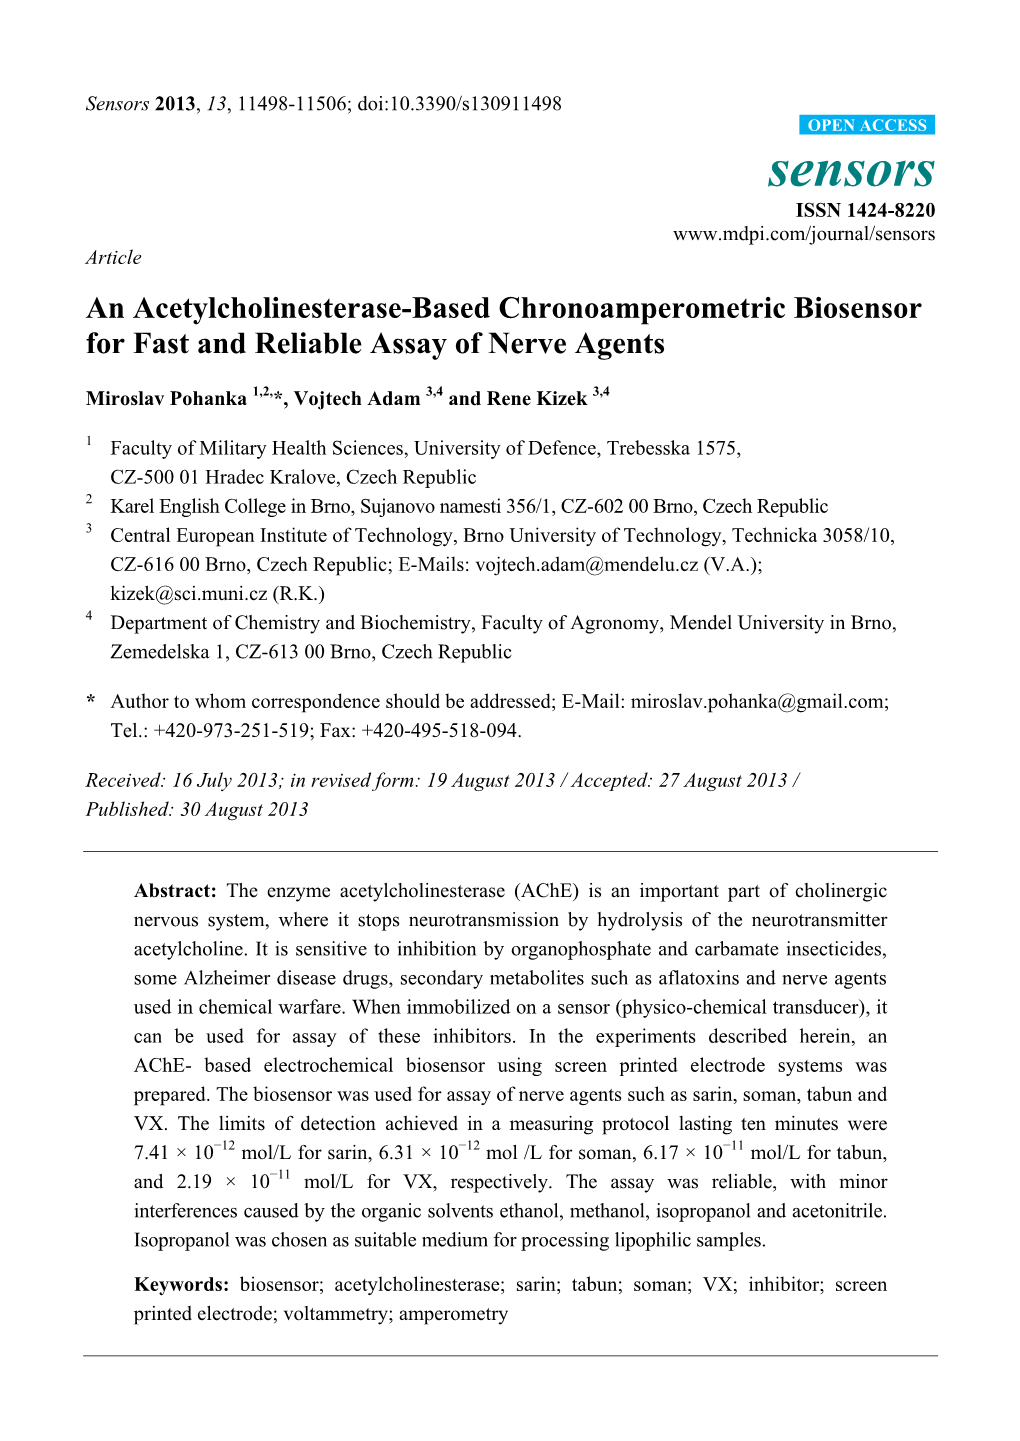 An Acetylcholinesterase-Based Chronoamperometric Biosensor for Fast and Reliable Assay of Nerve Agents